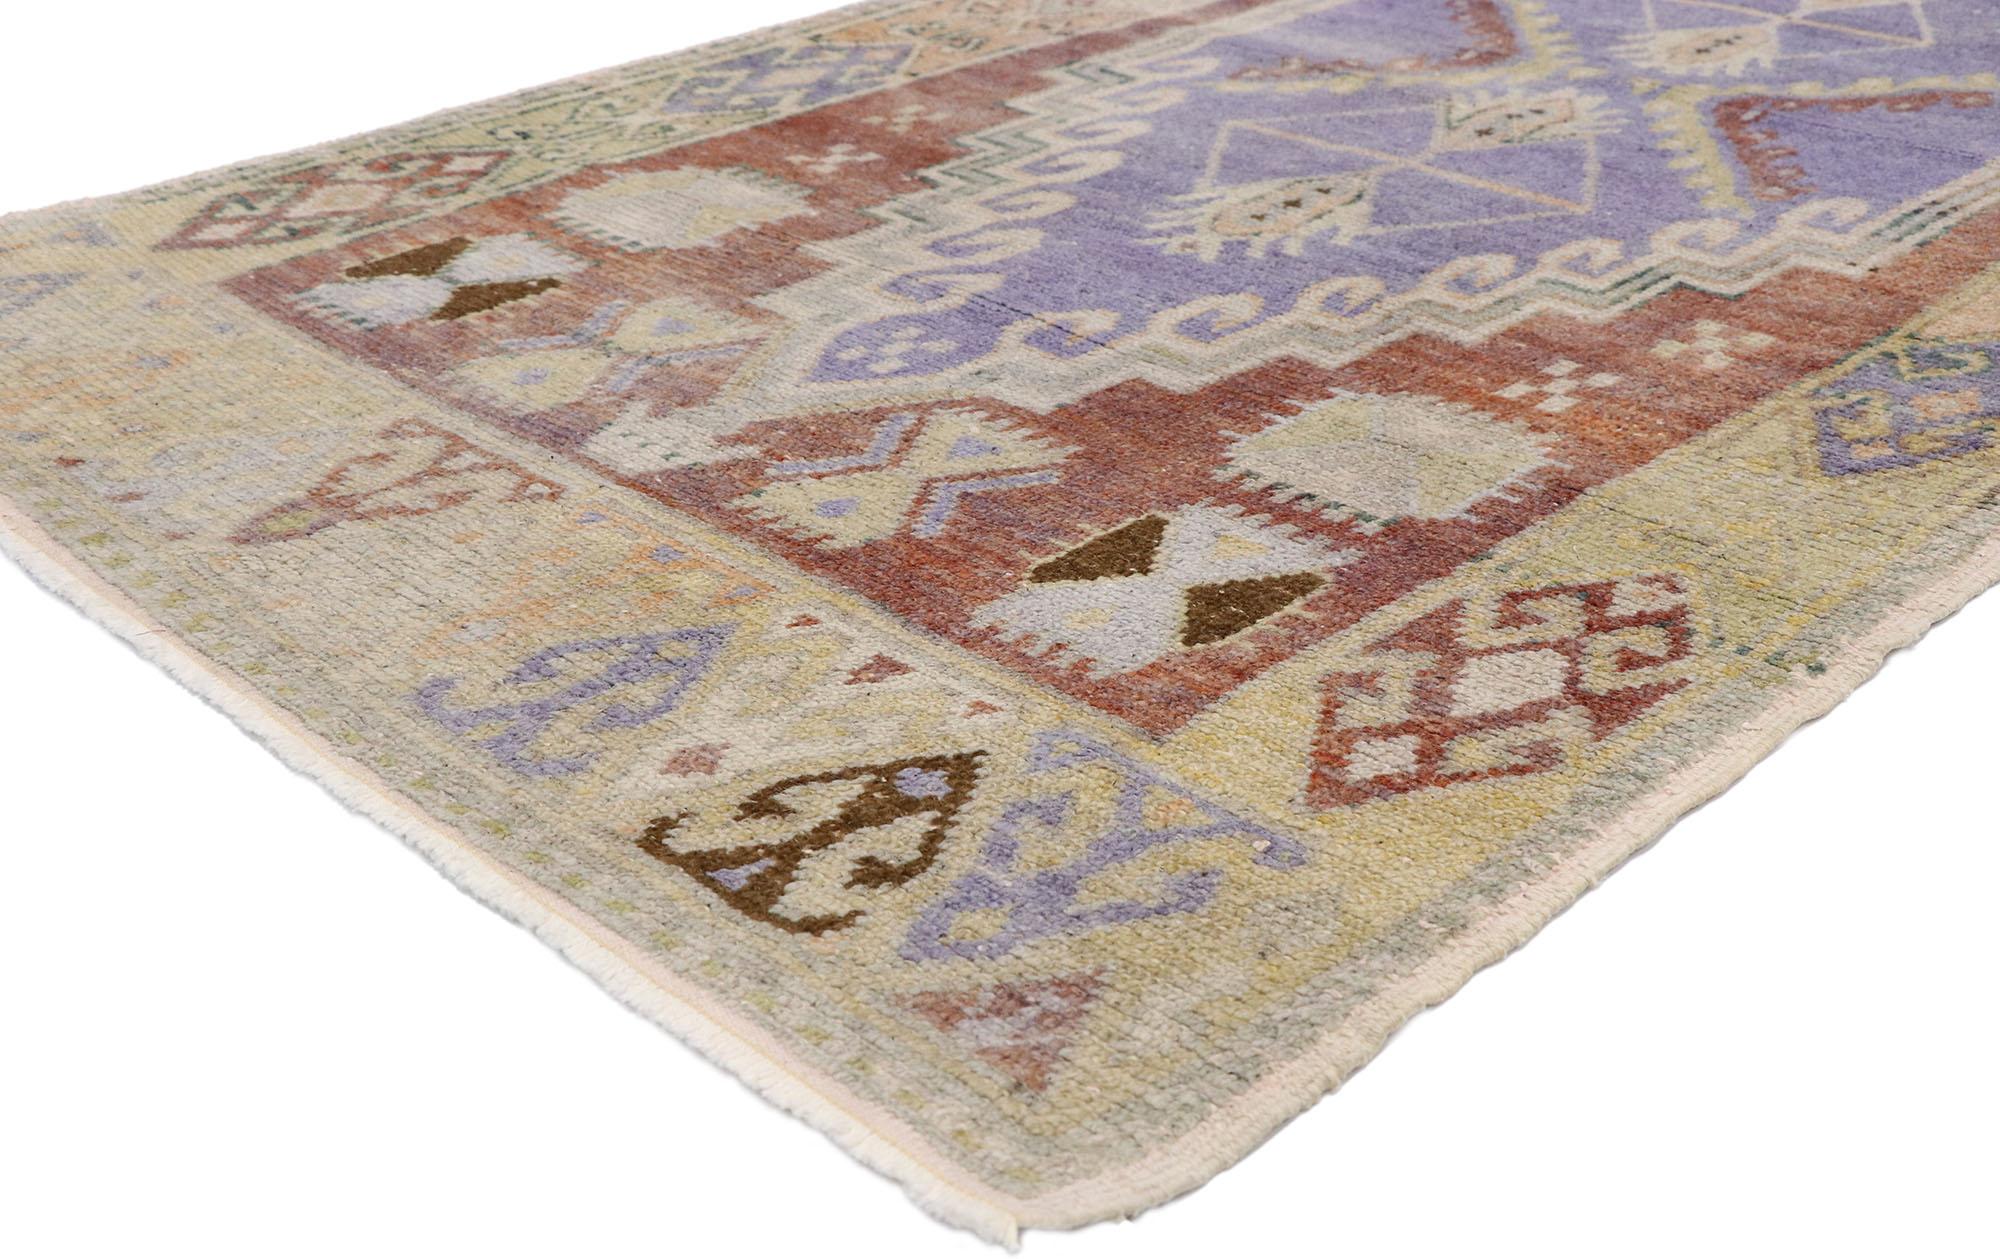 52757, vintage Turkish Oushak runner with rustic French and warm Georgian style. With its soft and delicate color palette and bold geometric form, this hand knotted wool vintage Turkish Oushak runner embodies both rustic French and Georgian style.